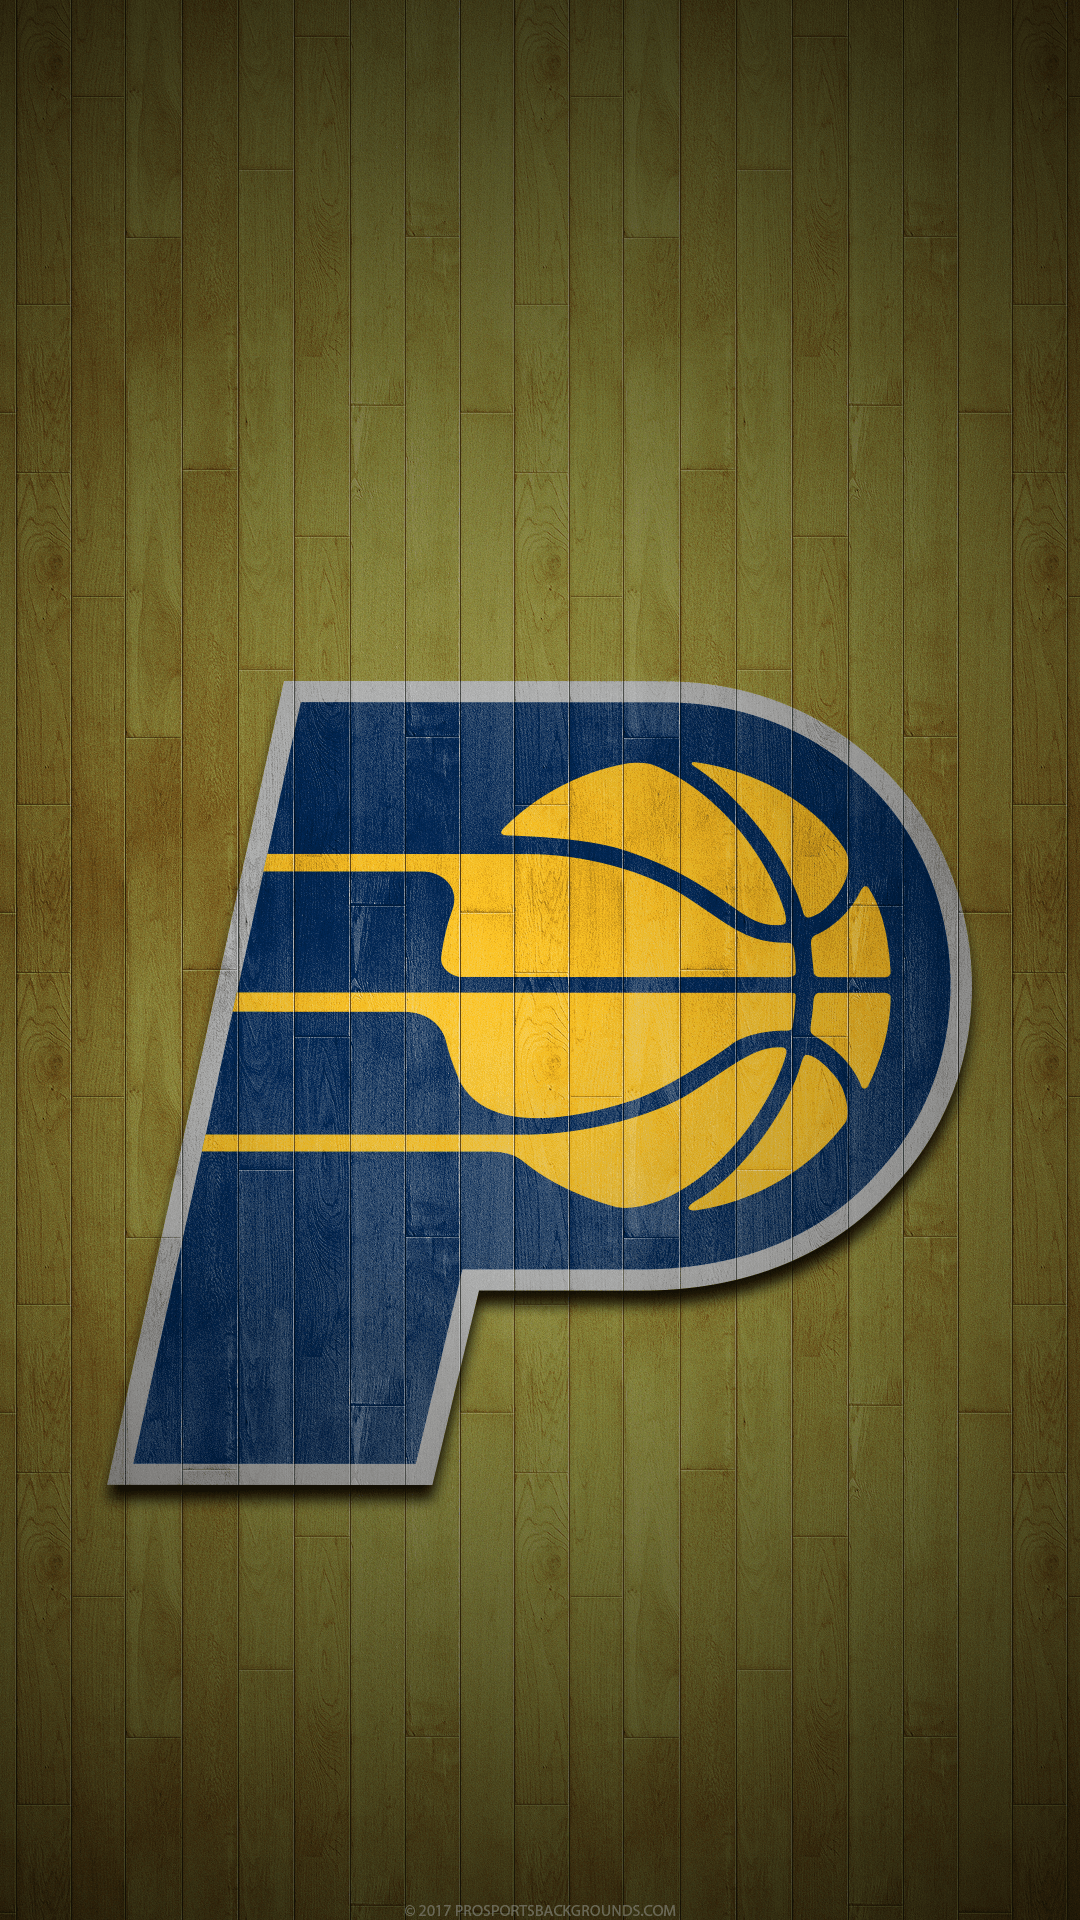 Indiana Pacers  Brand new wallpapers for your  on WallpaperWednesday  Extra versions are available in our official mobile app  Download at  PacerscomApp  Visit the Featured tab on the app